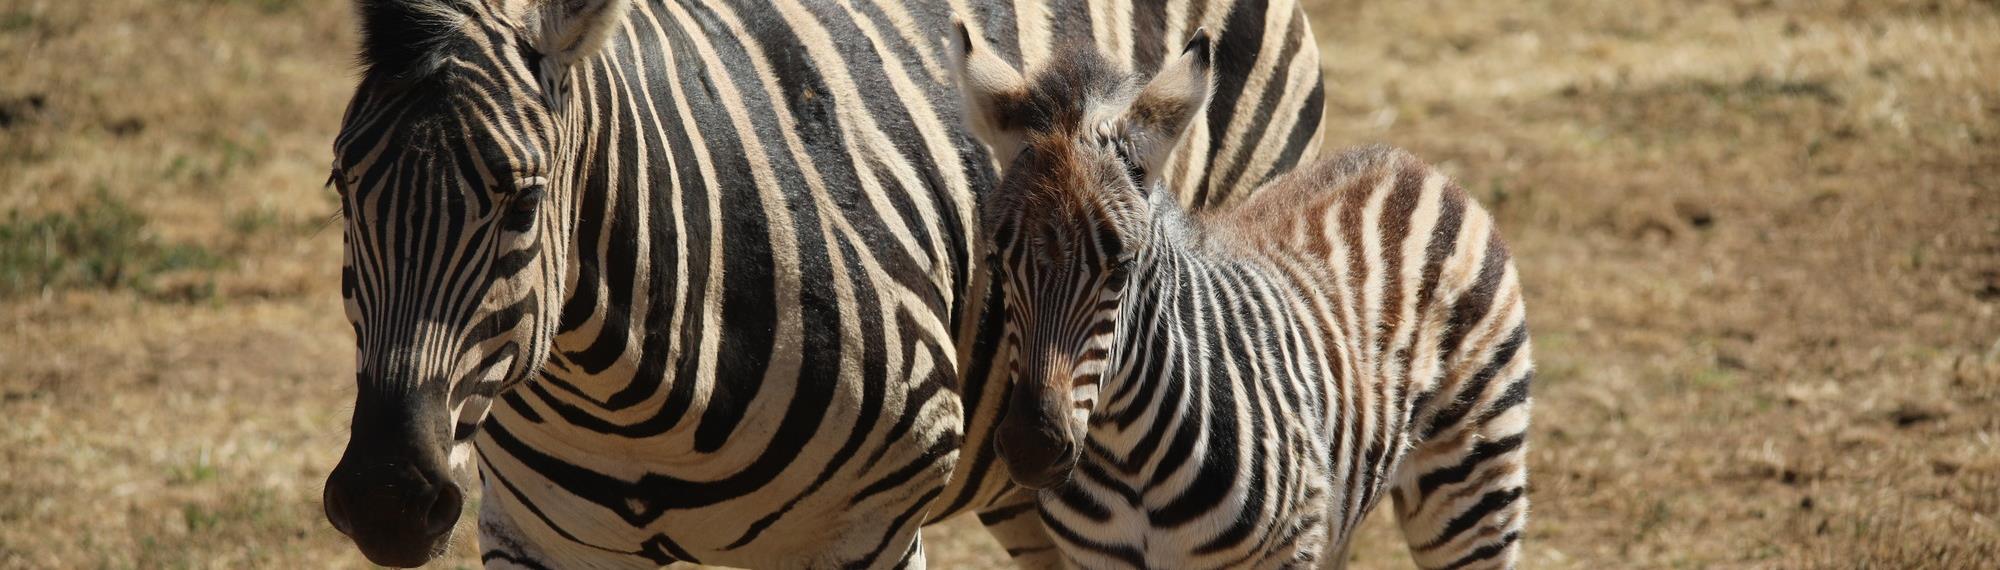 Small zebra foal standing next to its mother on the Savannah. They are looking forward just to the left of the camera with their ears tilted back. 